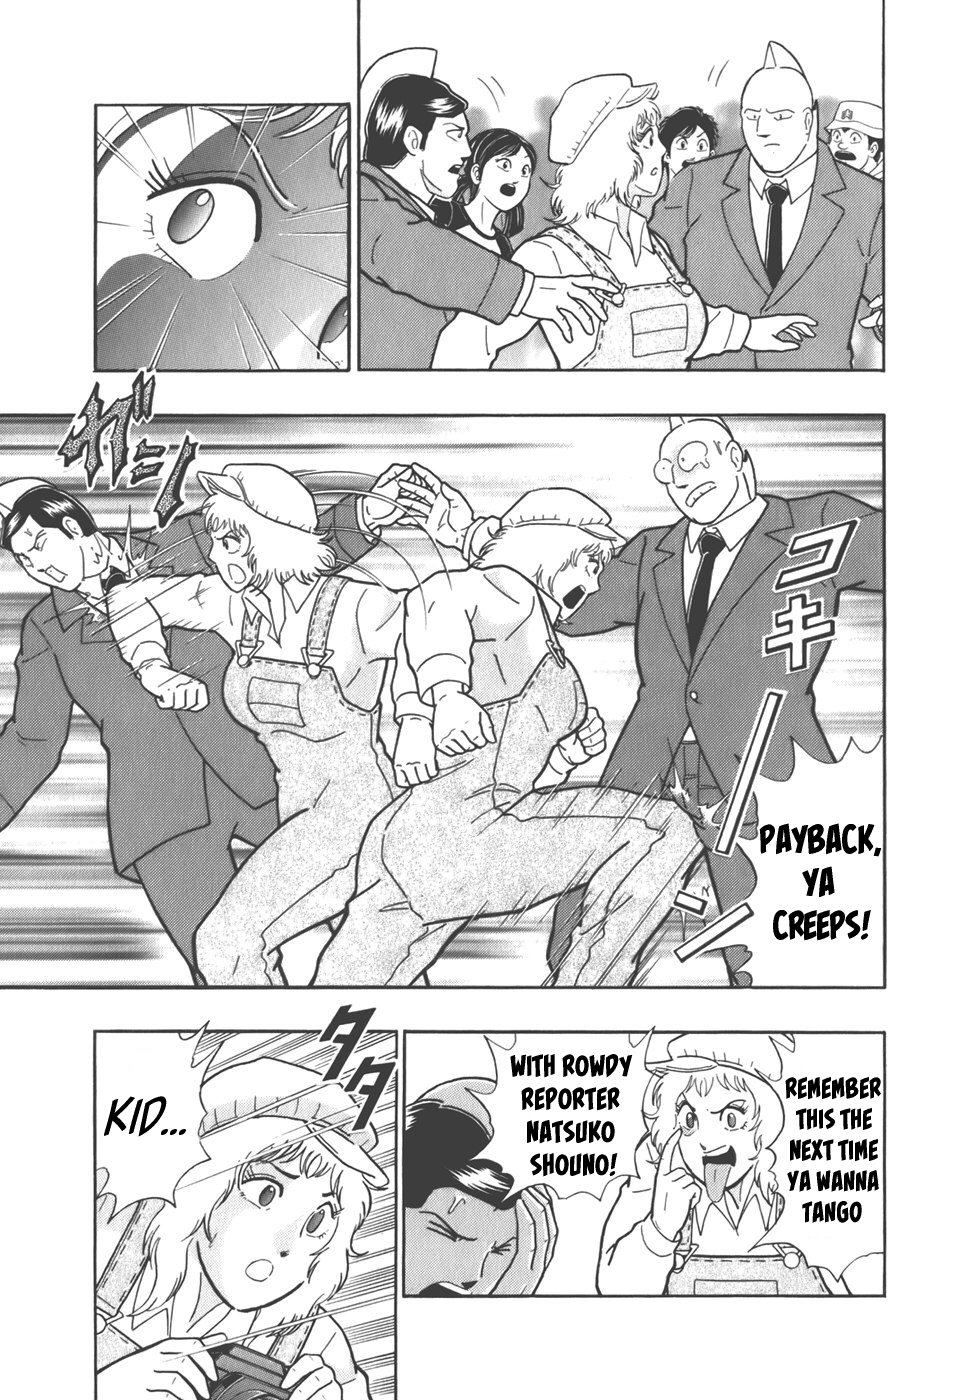 Kinnikuman Nisei: Ultimate Choujin Tag Vol. 4 Ch. 38 Win the Free for all With "The Ultimate Finisher"!